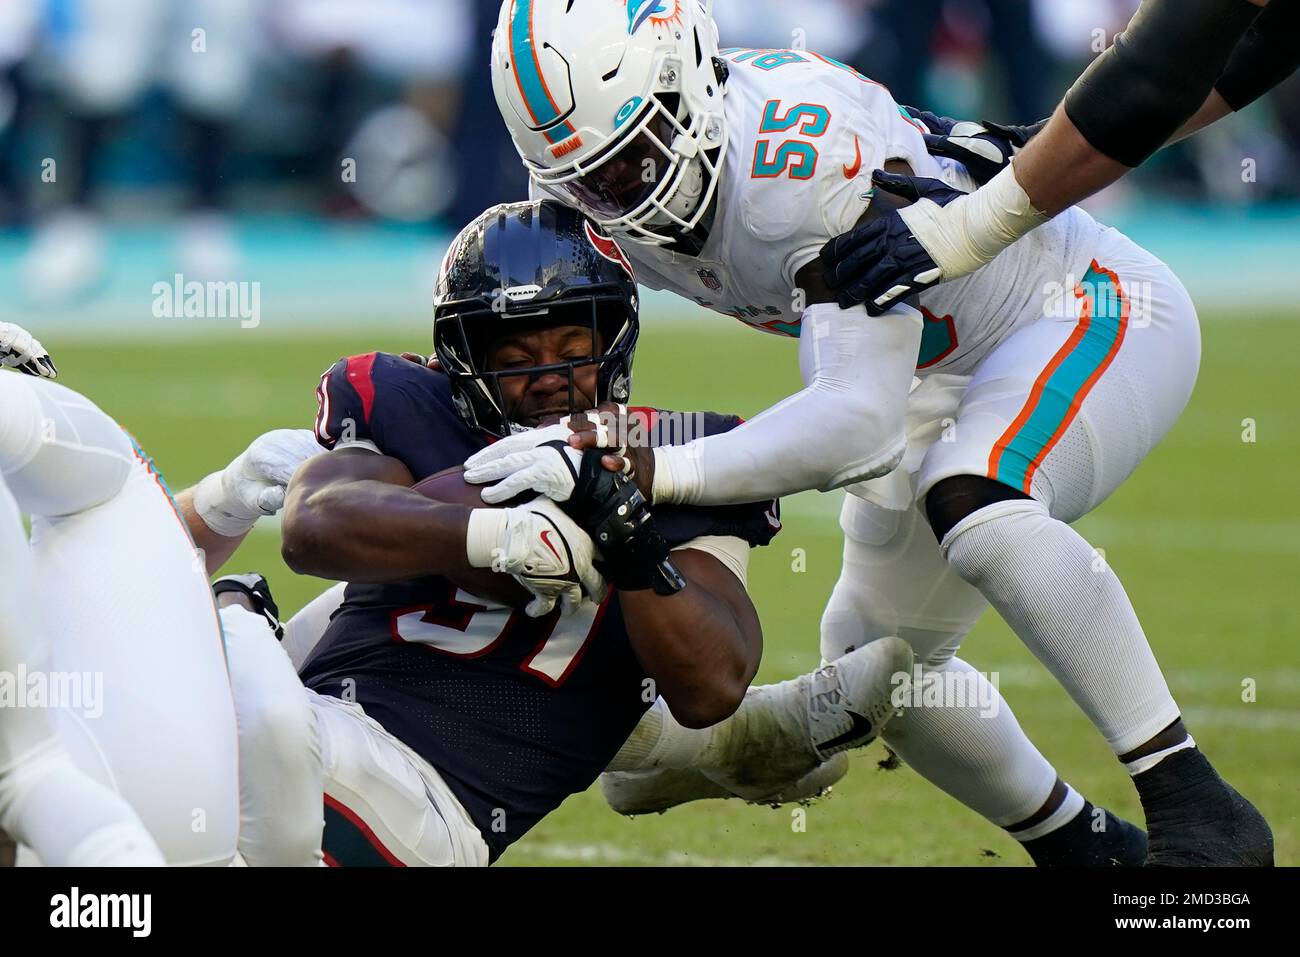 Miami Dolphins outside linebacker Jerome Baker (55) tackles